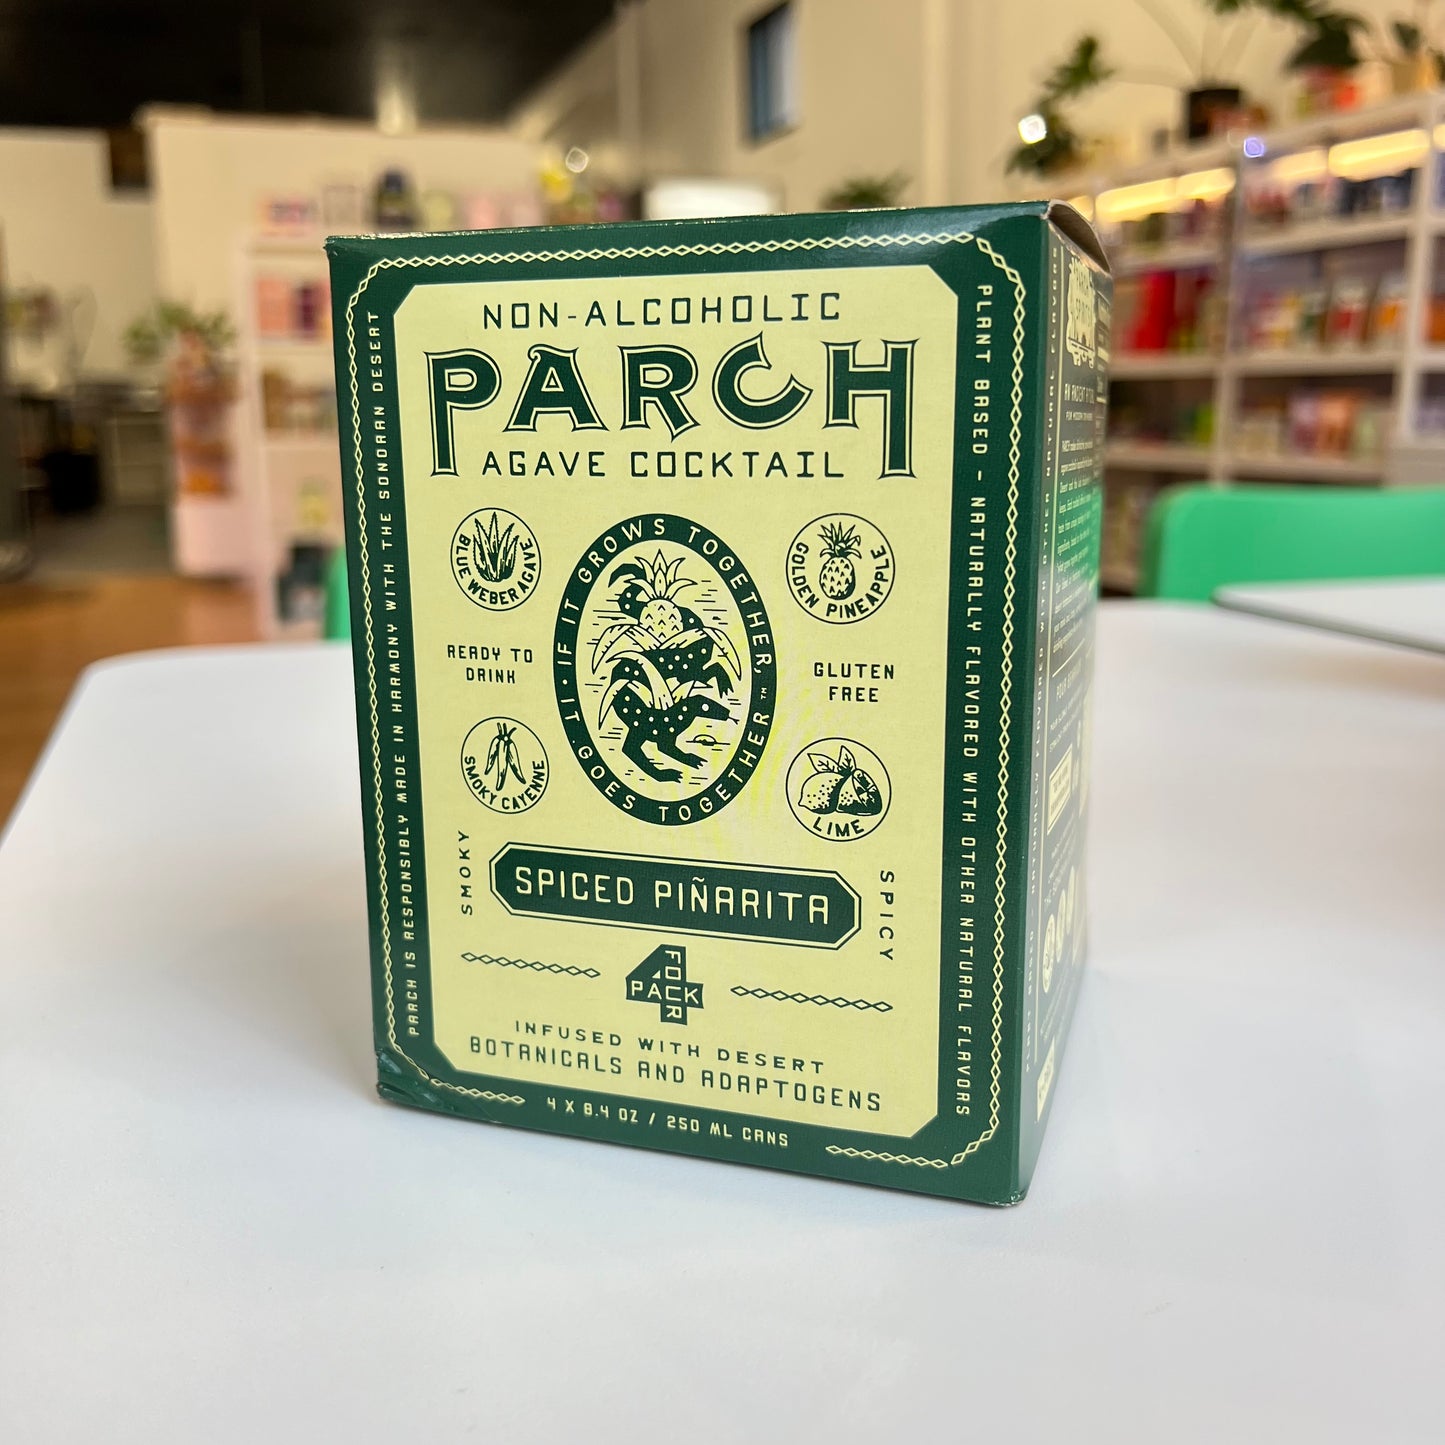 Parch | Spiced Piñarita - Agave NA Cocktail 4-pack